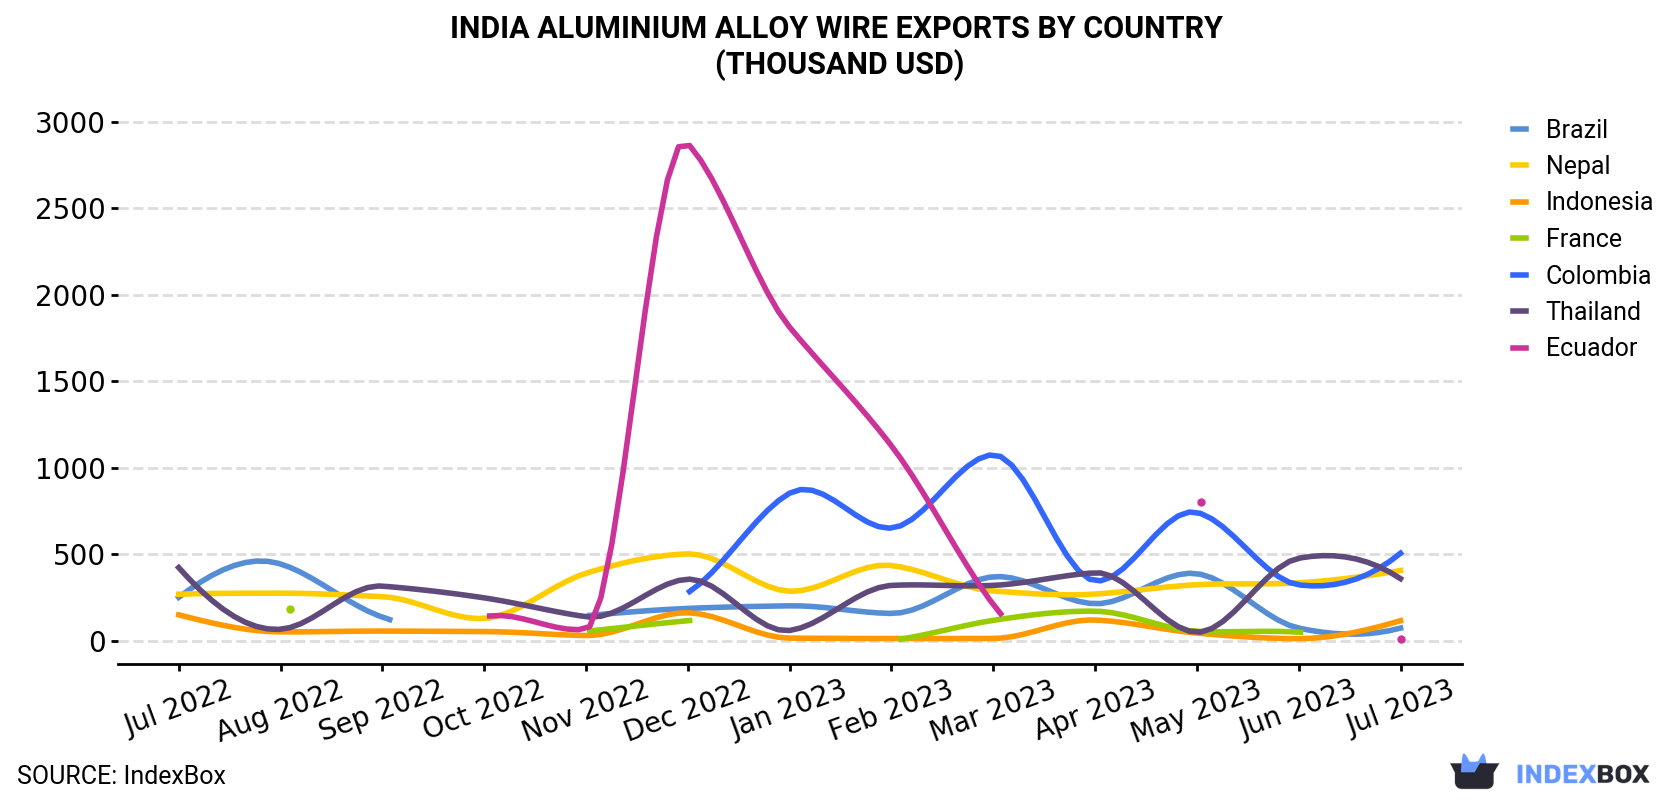 India Aluminium Alloy Wire Exports By Country (Thousand USD)